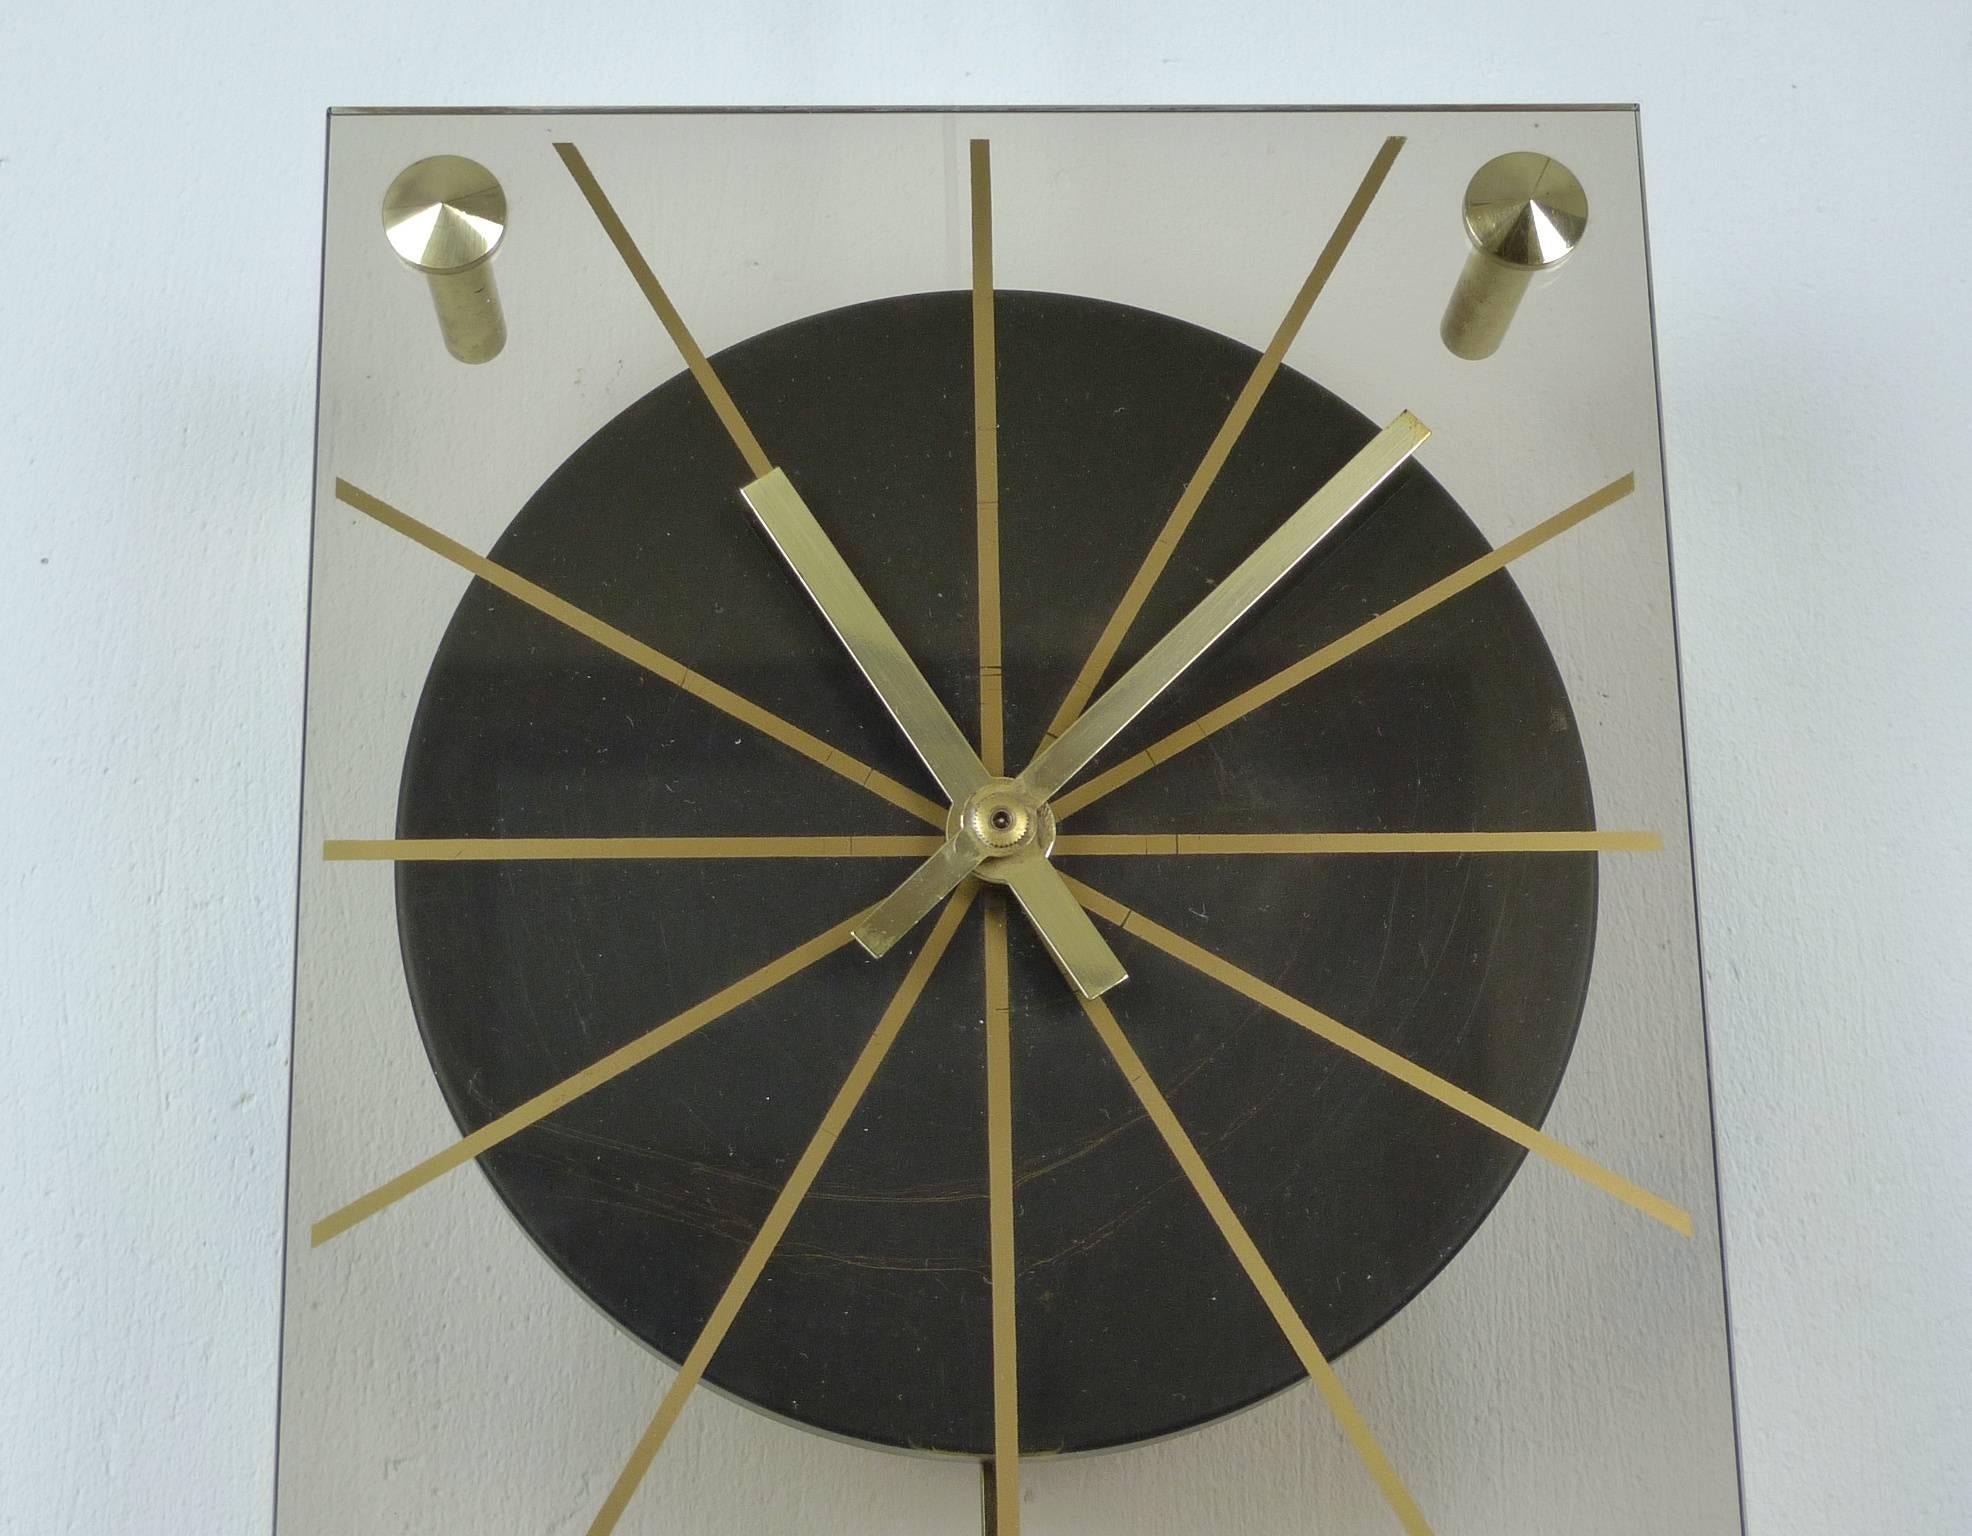 1960s wall clock on tinted Plexiglass with a pendulum bar made of brass. The drive is powered by a battery operated quartz movement from Junghans. This watch is fully functional and is in a very good original condition.